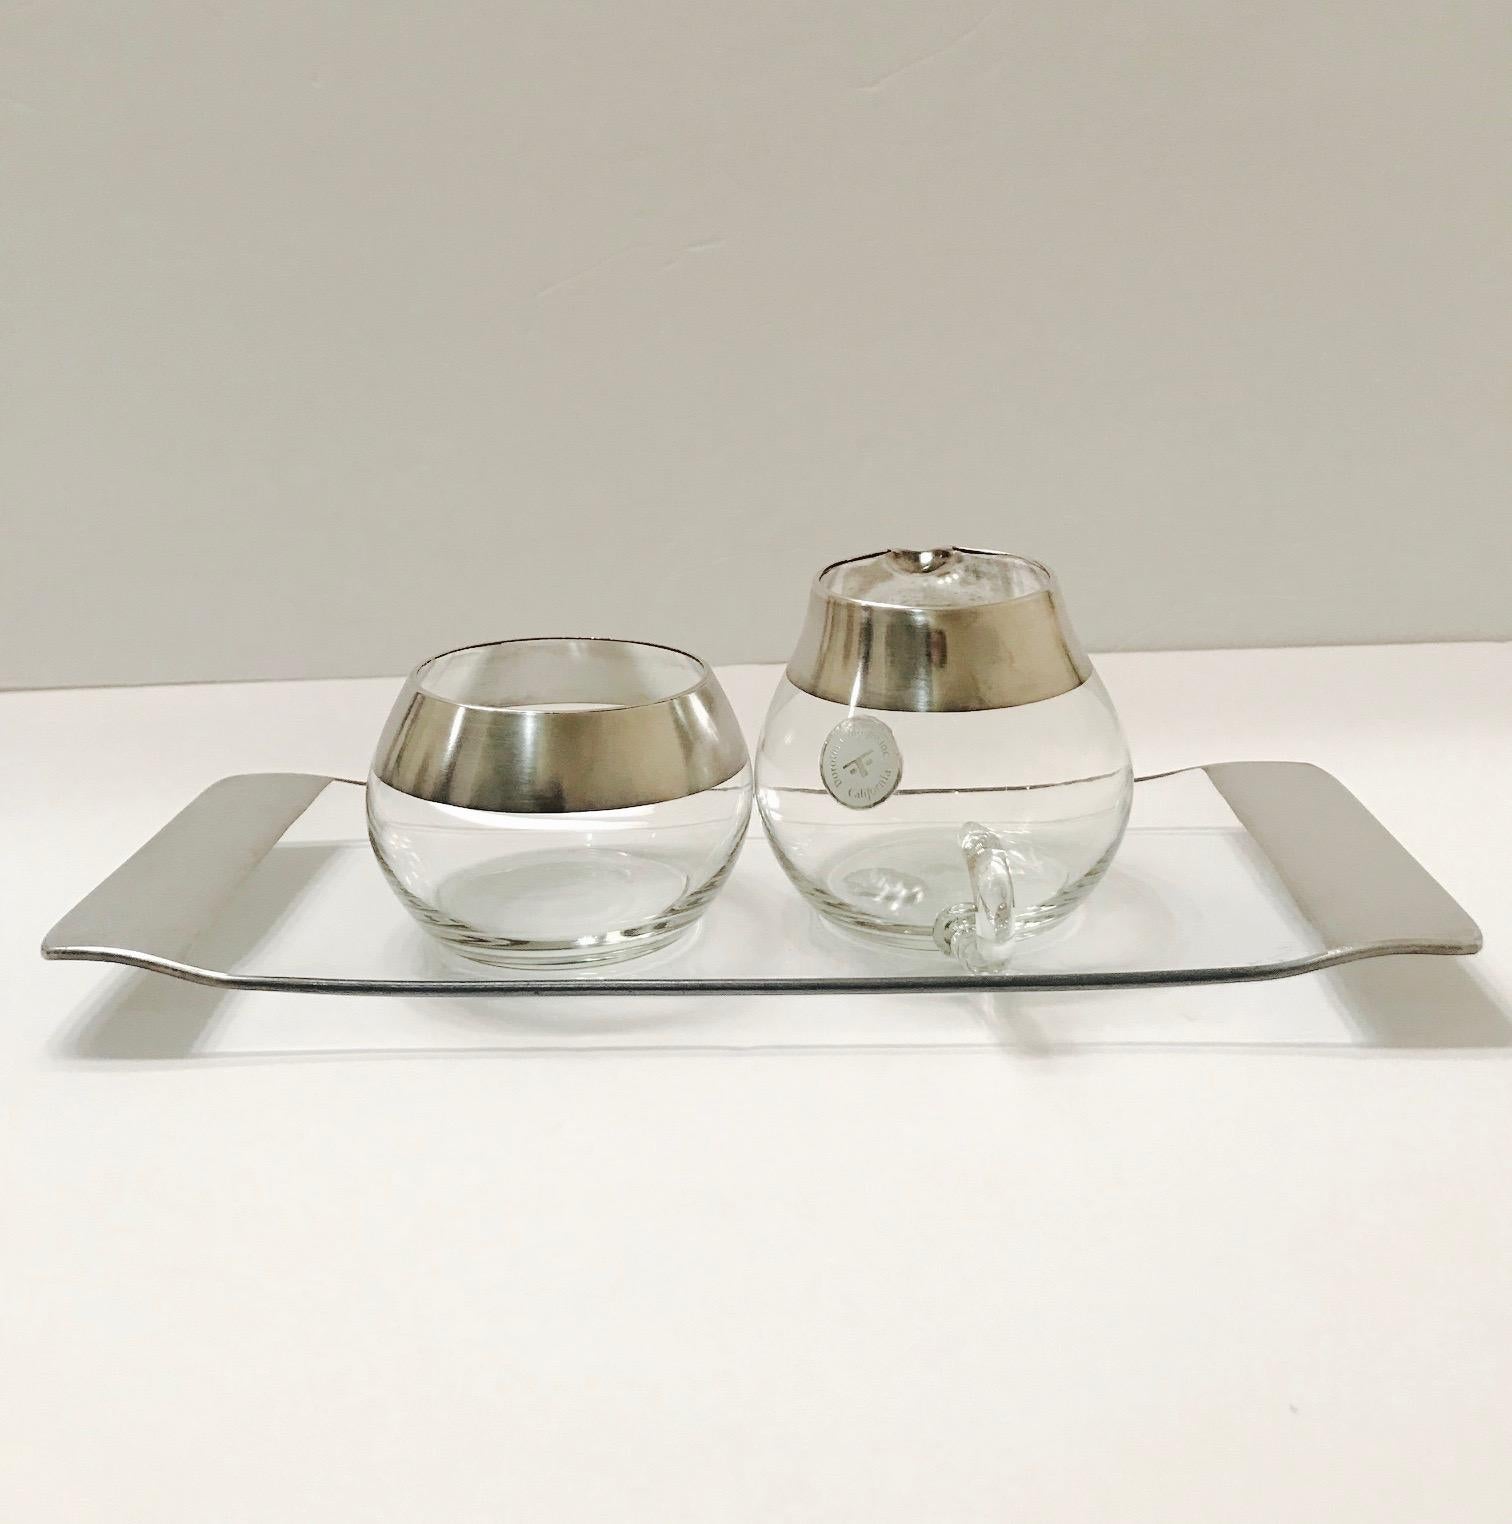 American 1950s Sugar and Creamer Set with Sterling Silver Overlay by Dorothy Thorpe 